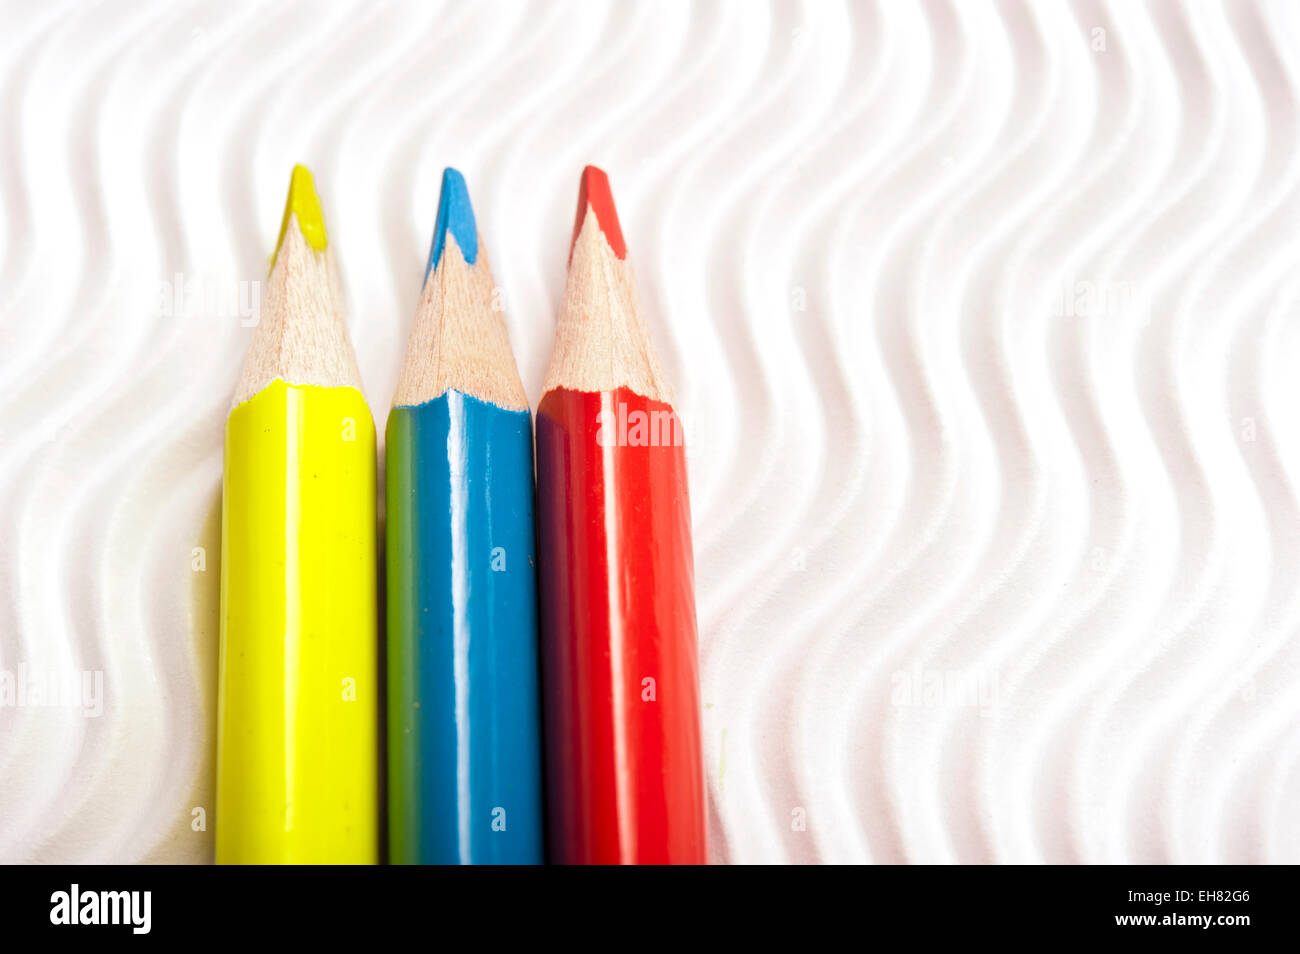 blue yellow and red pencils Stock Photo